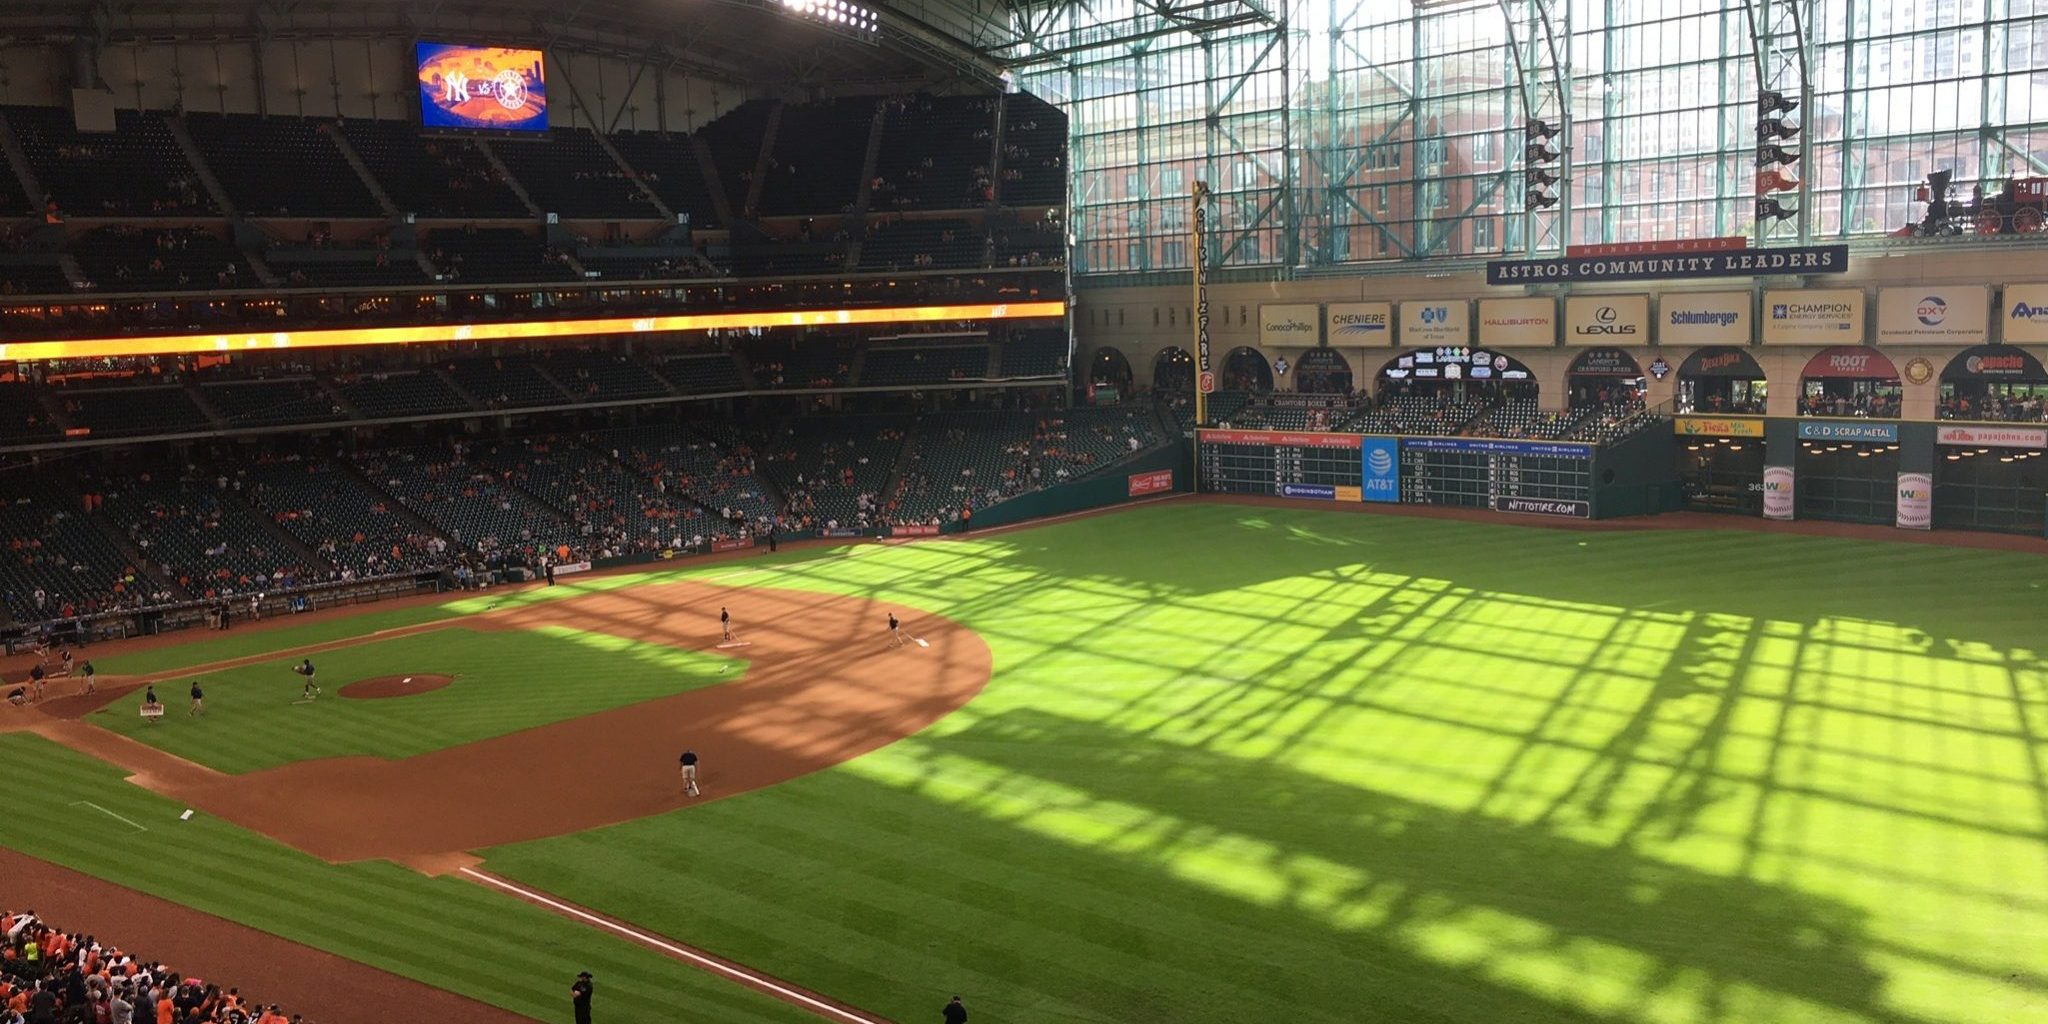 Visiting Minute Maid Park for Visionary Thinking Day